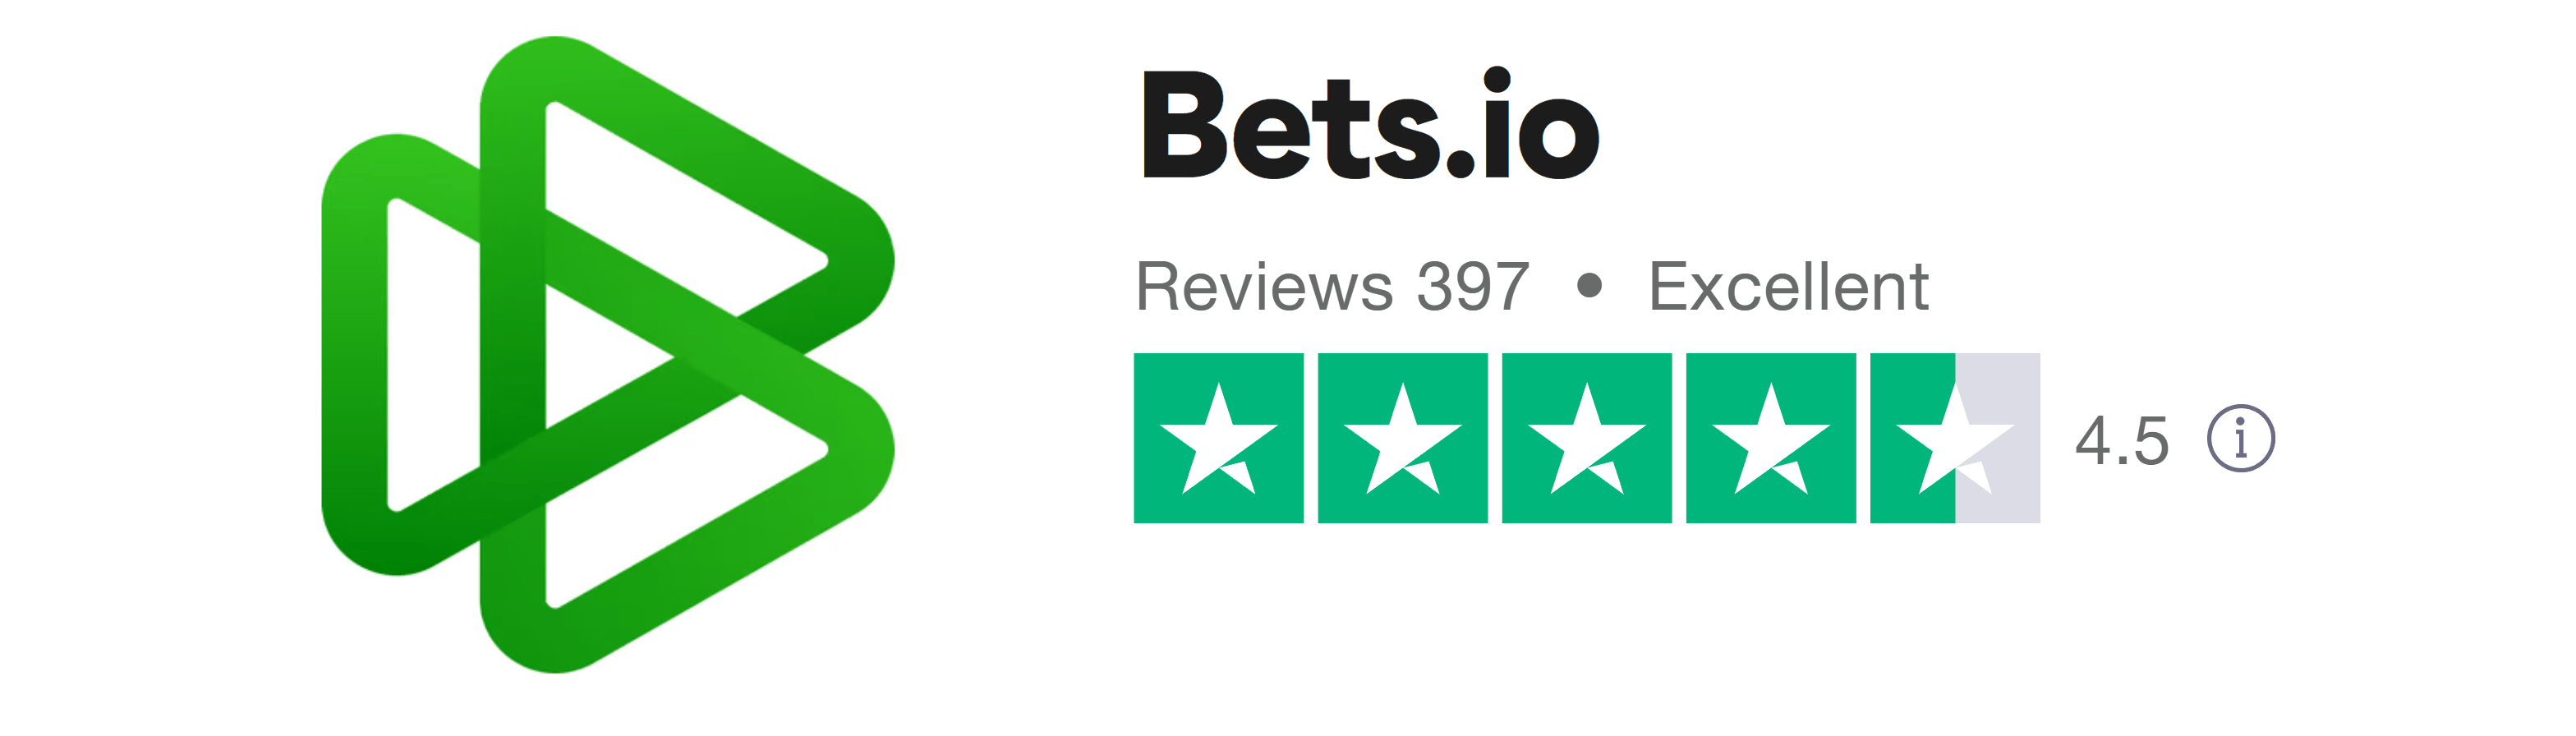 Trustpilot rating screenshot for the Bets.io